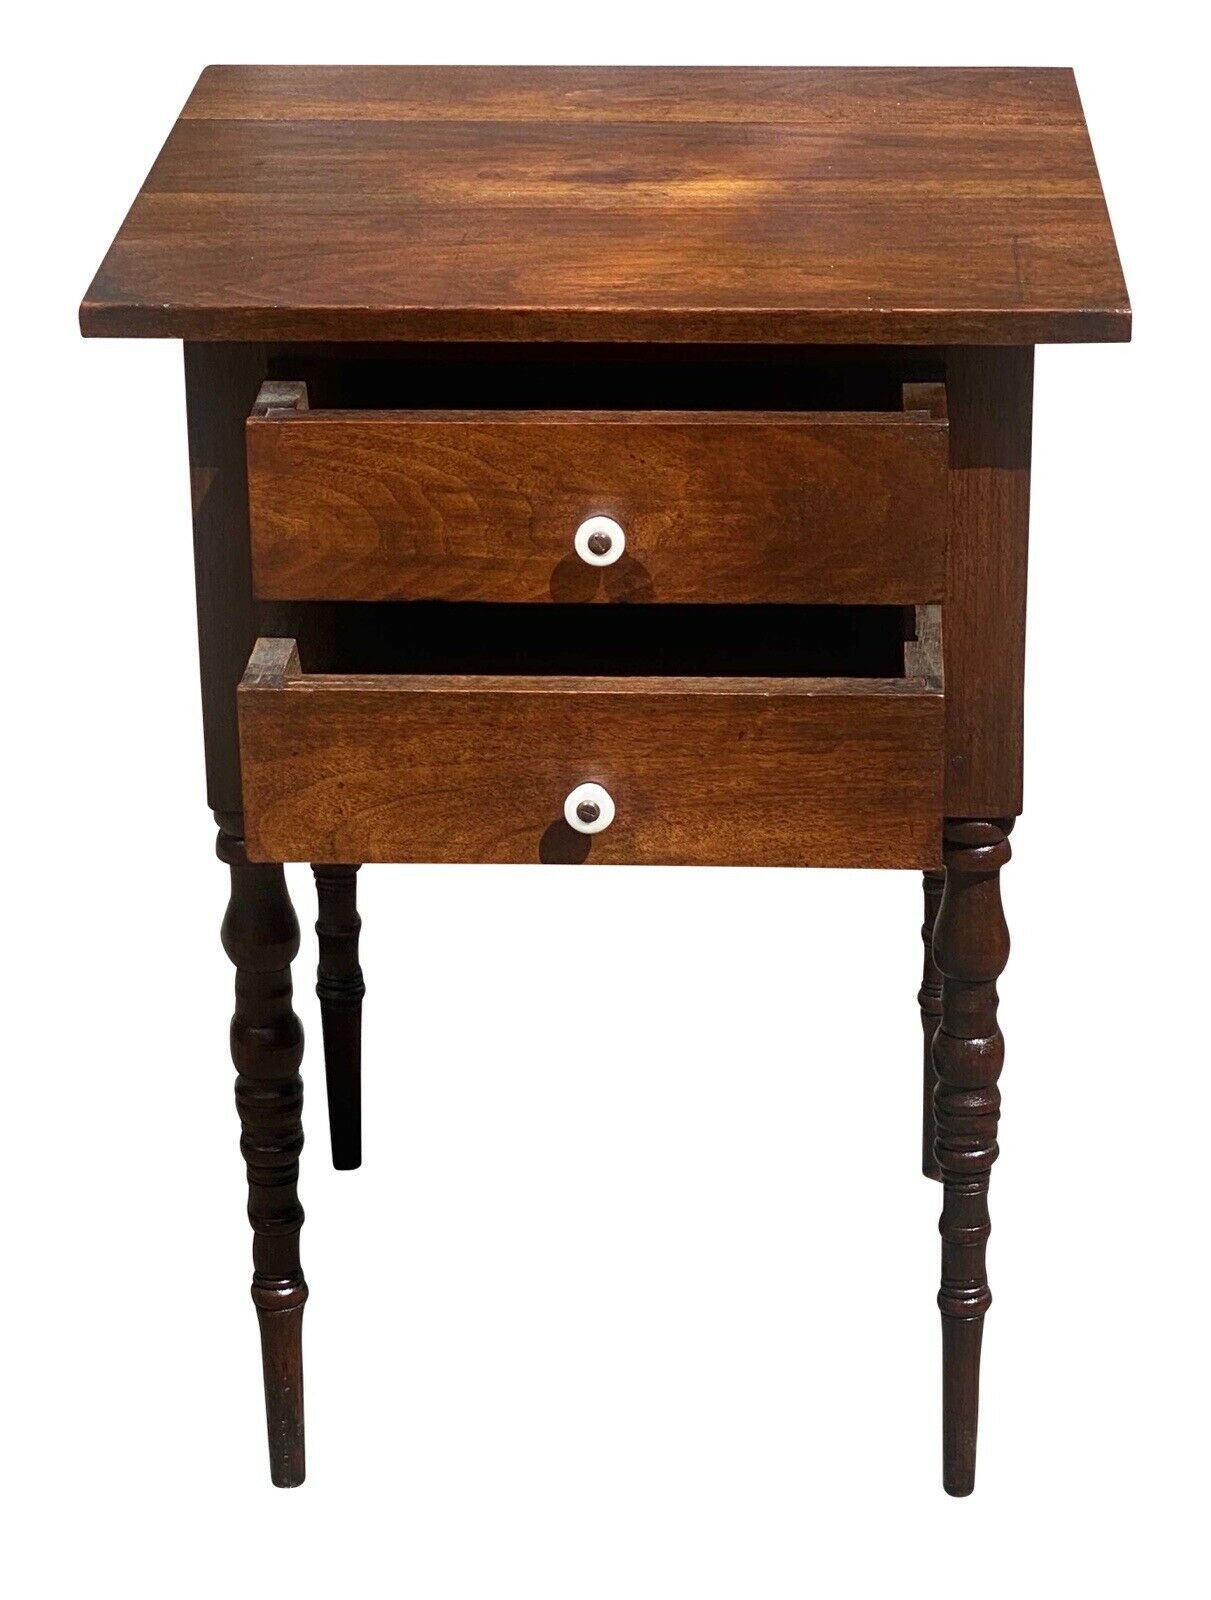 19TH C ANTIQUE FEDERAL PERIOD VIRGINIA WALNUT 2 DRAWER WORK TABLE / NIGHTSTAND